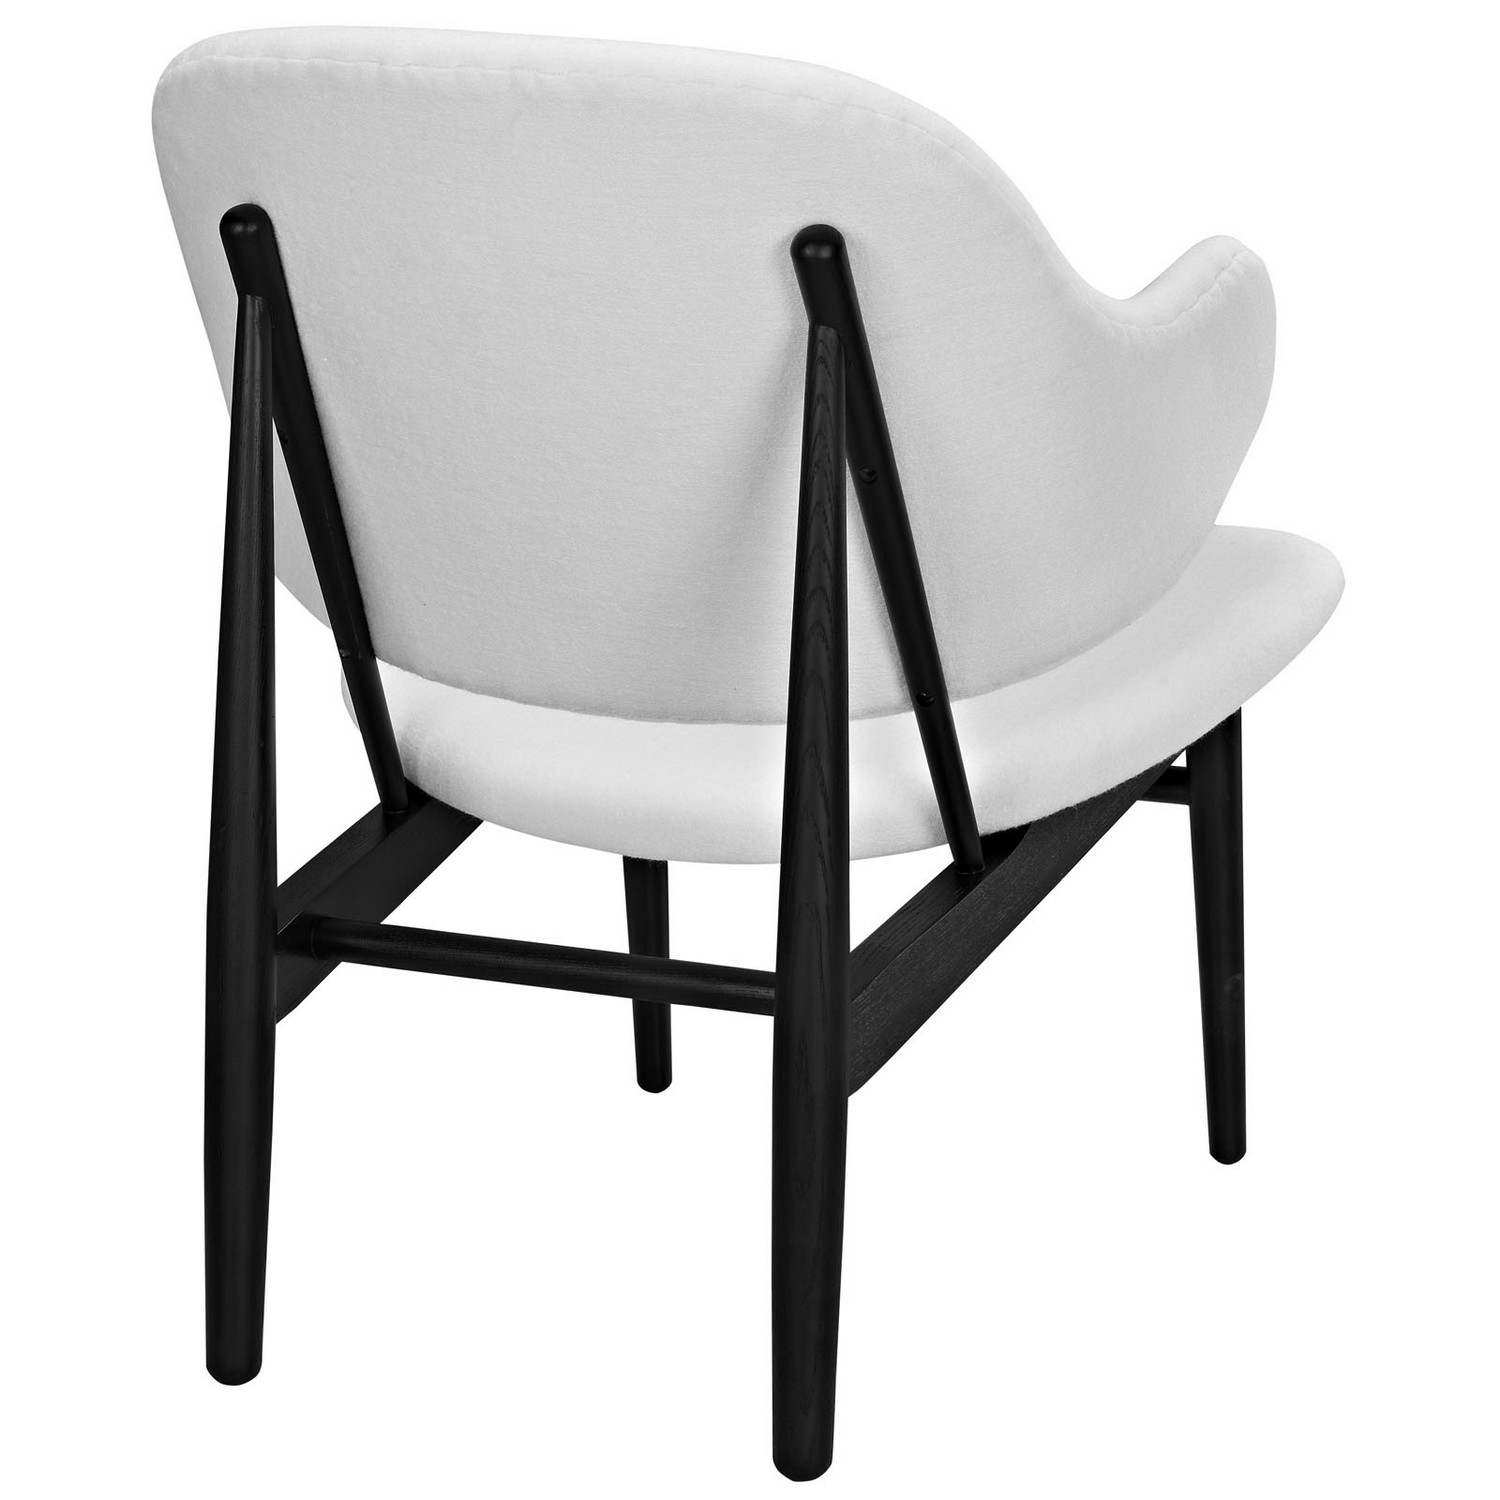 Modway Suffuse Lounge Chair - Black/White